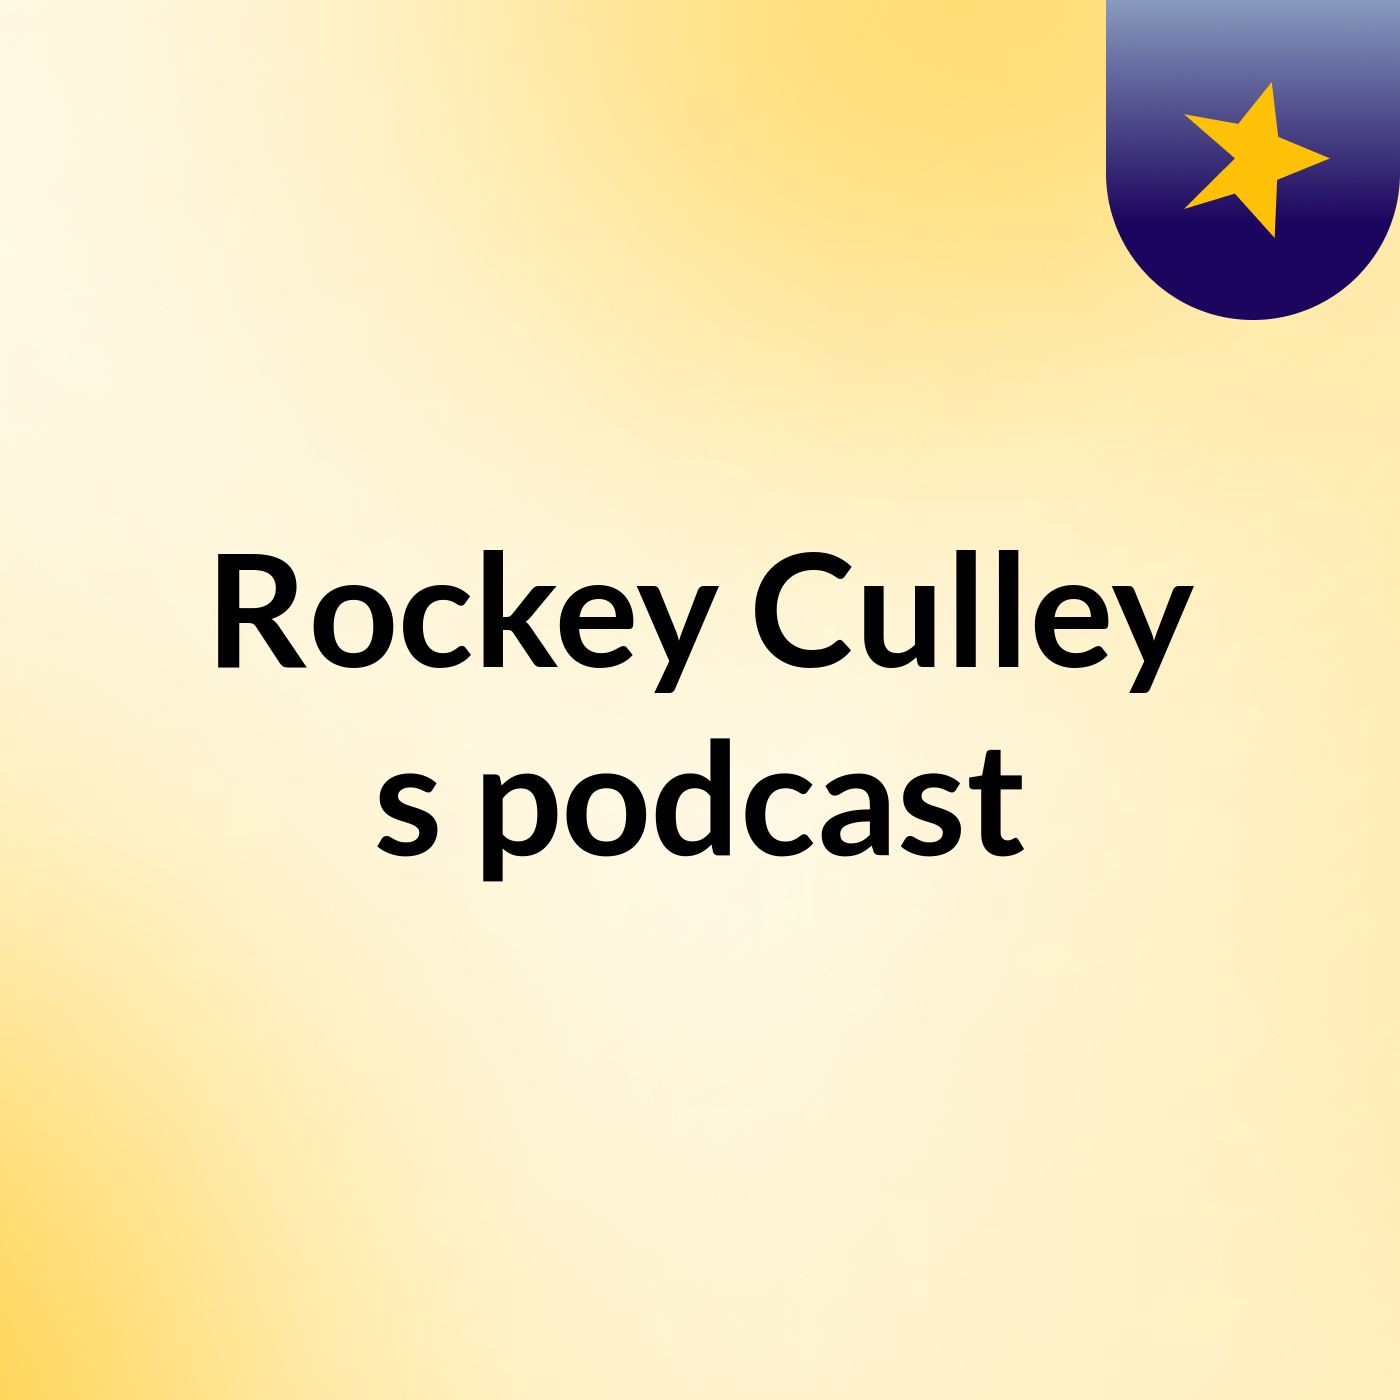 Rockey Culley's podcast